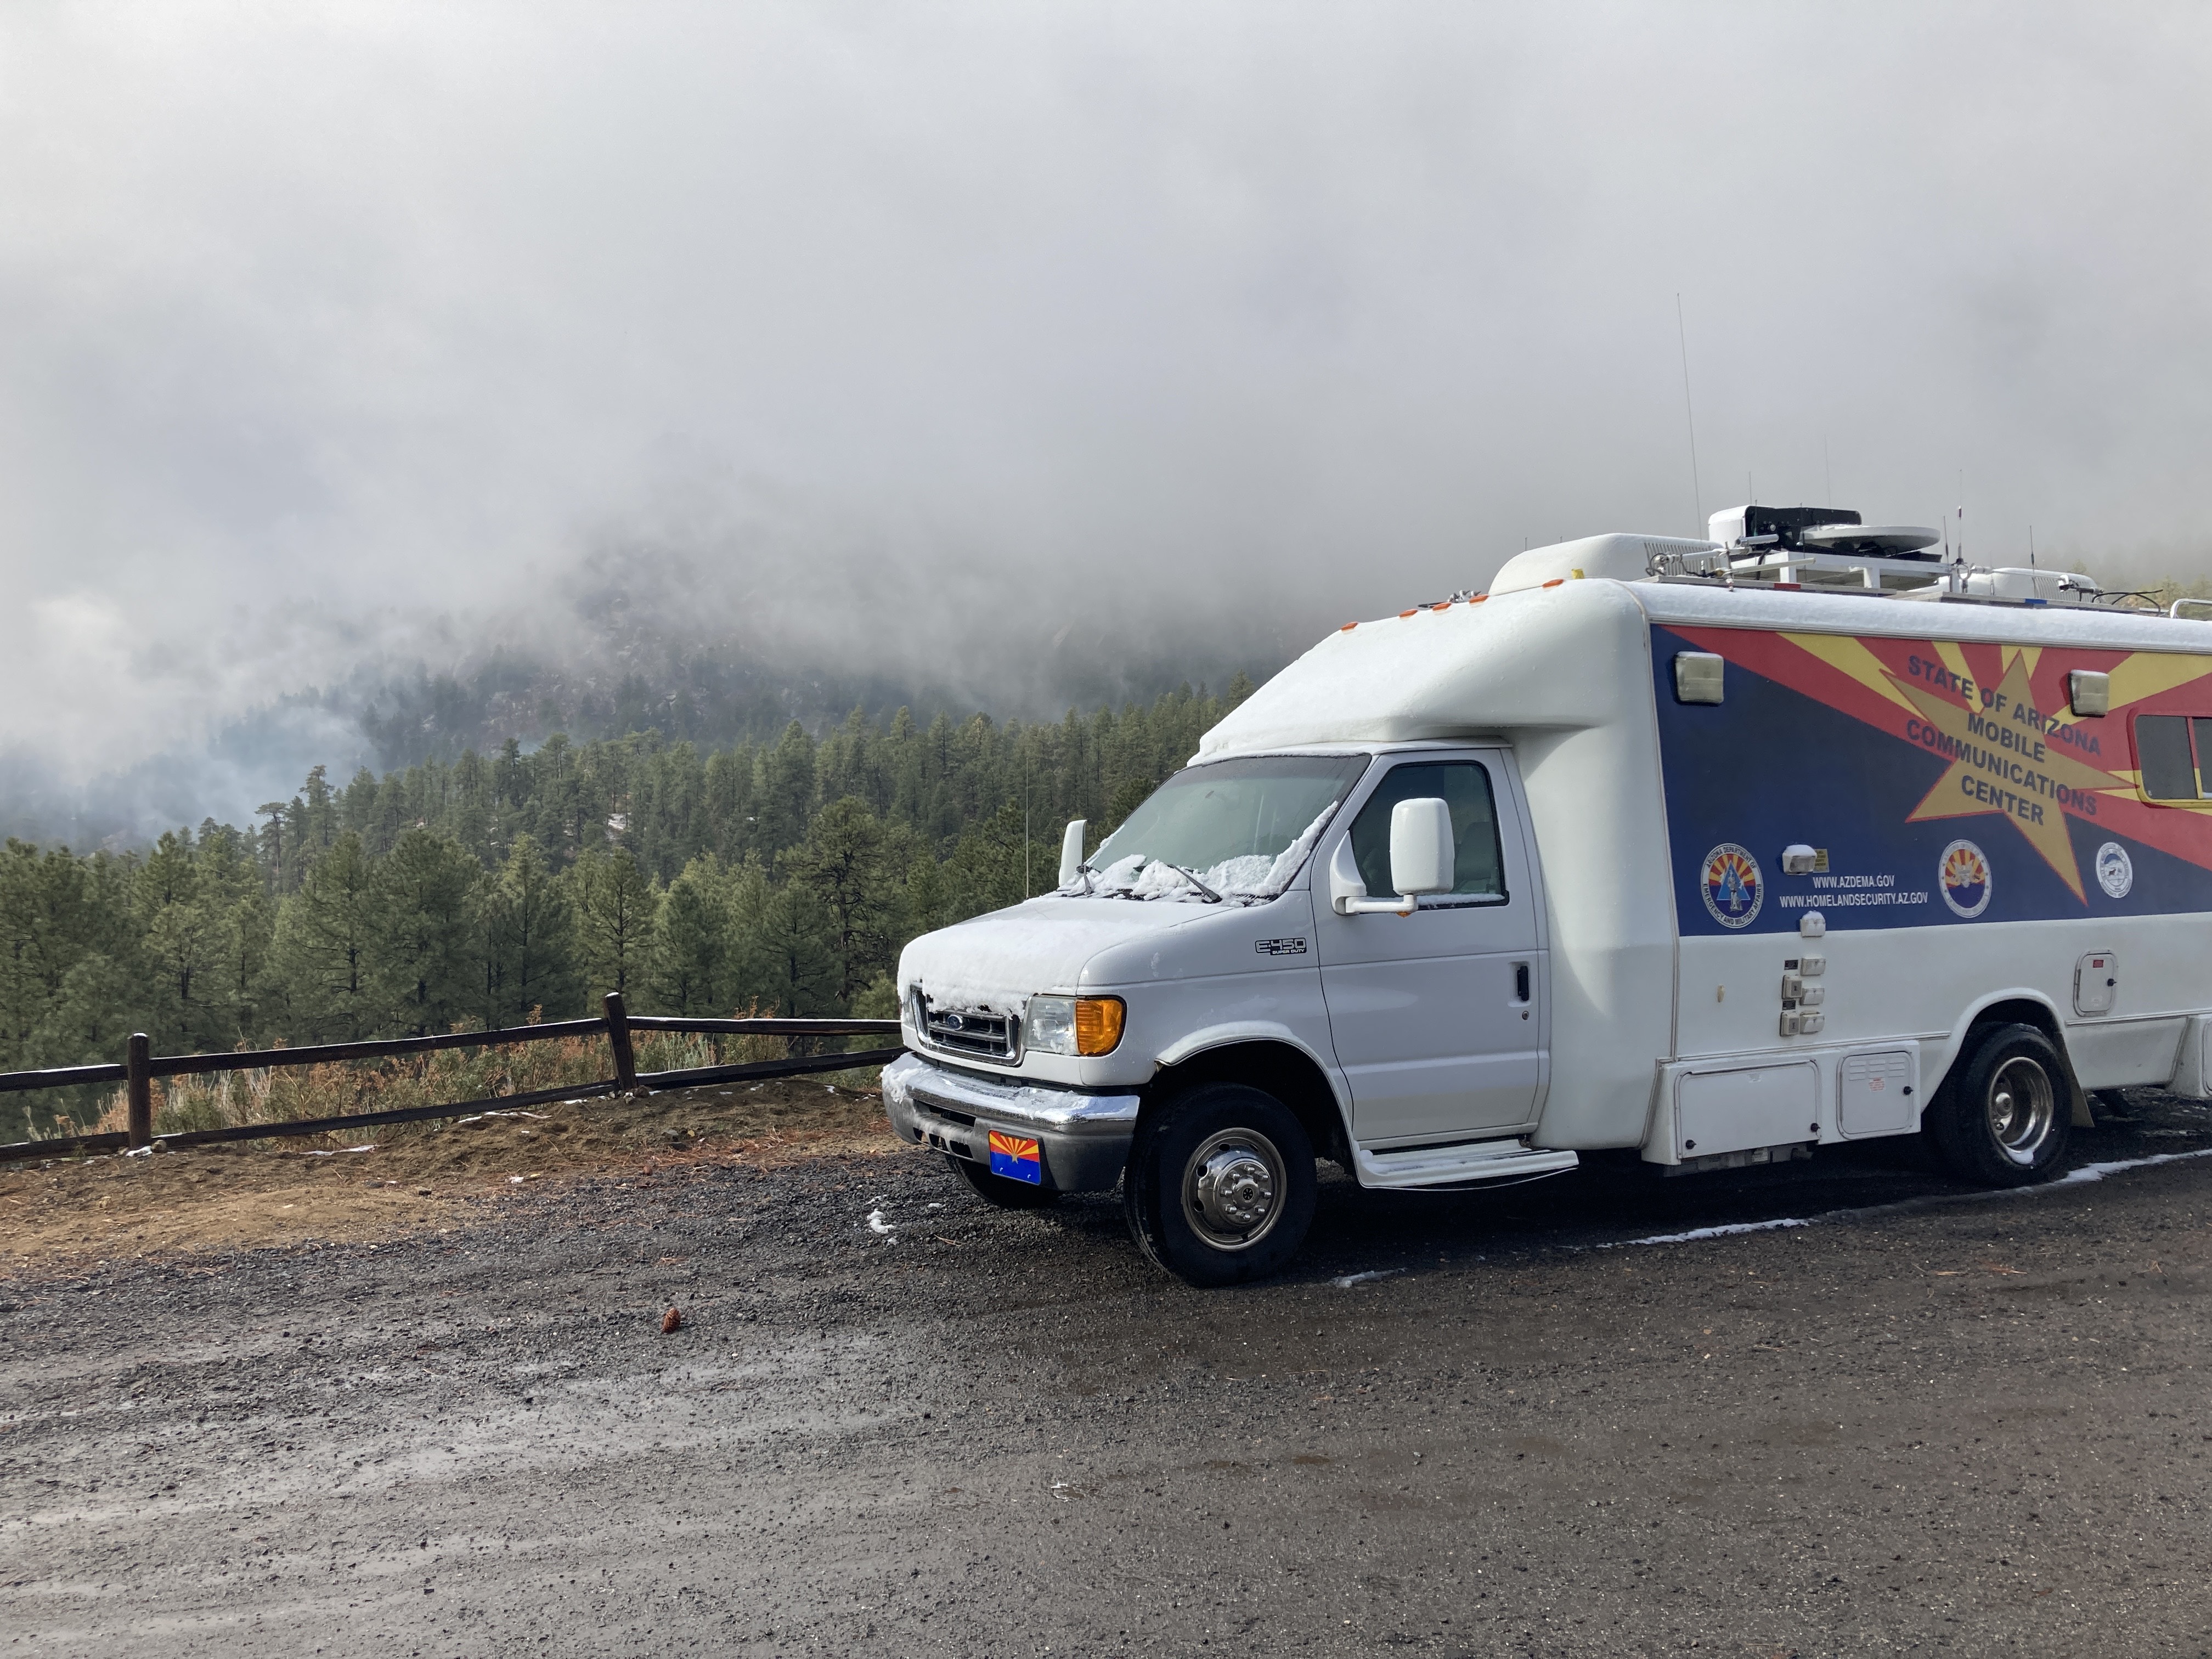 A photo of the "Toad" mobile communications center, parked on the side of the road, with snow covering part of the windshield and hood of the vehicle, with foggy mountain background.